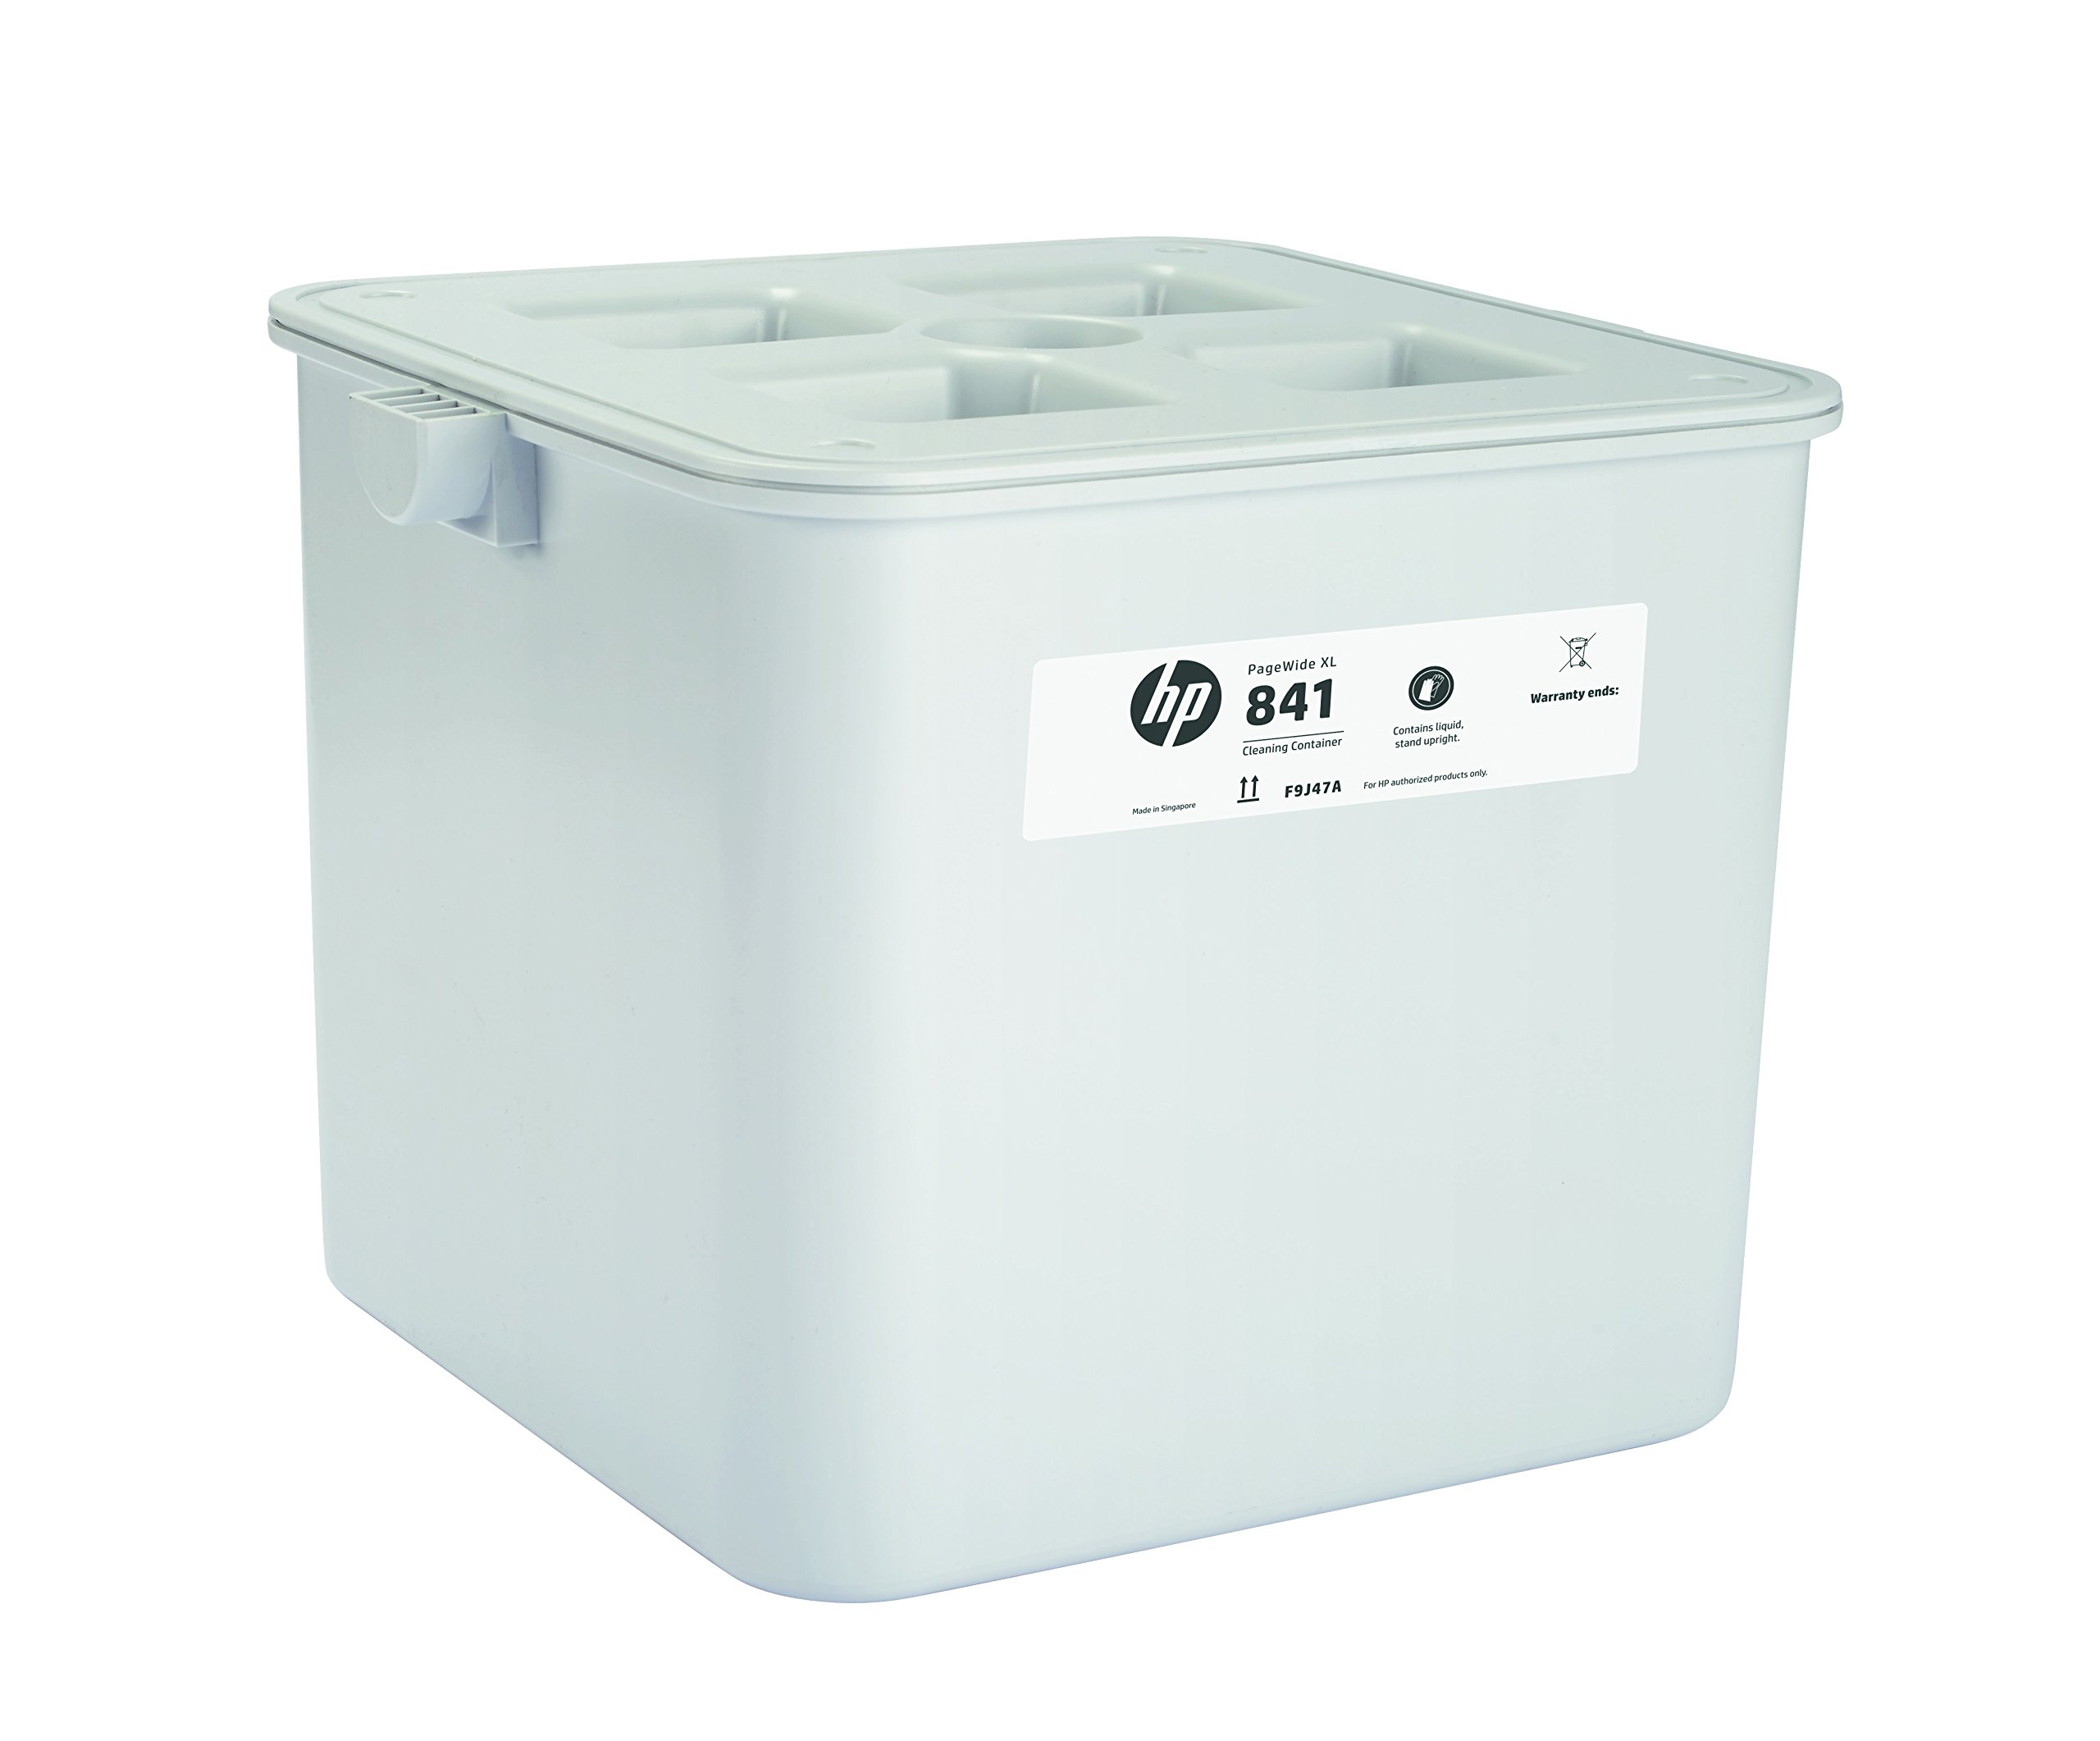 HP 841 CLEANING CONTAINER